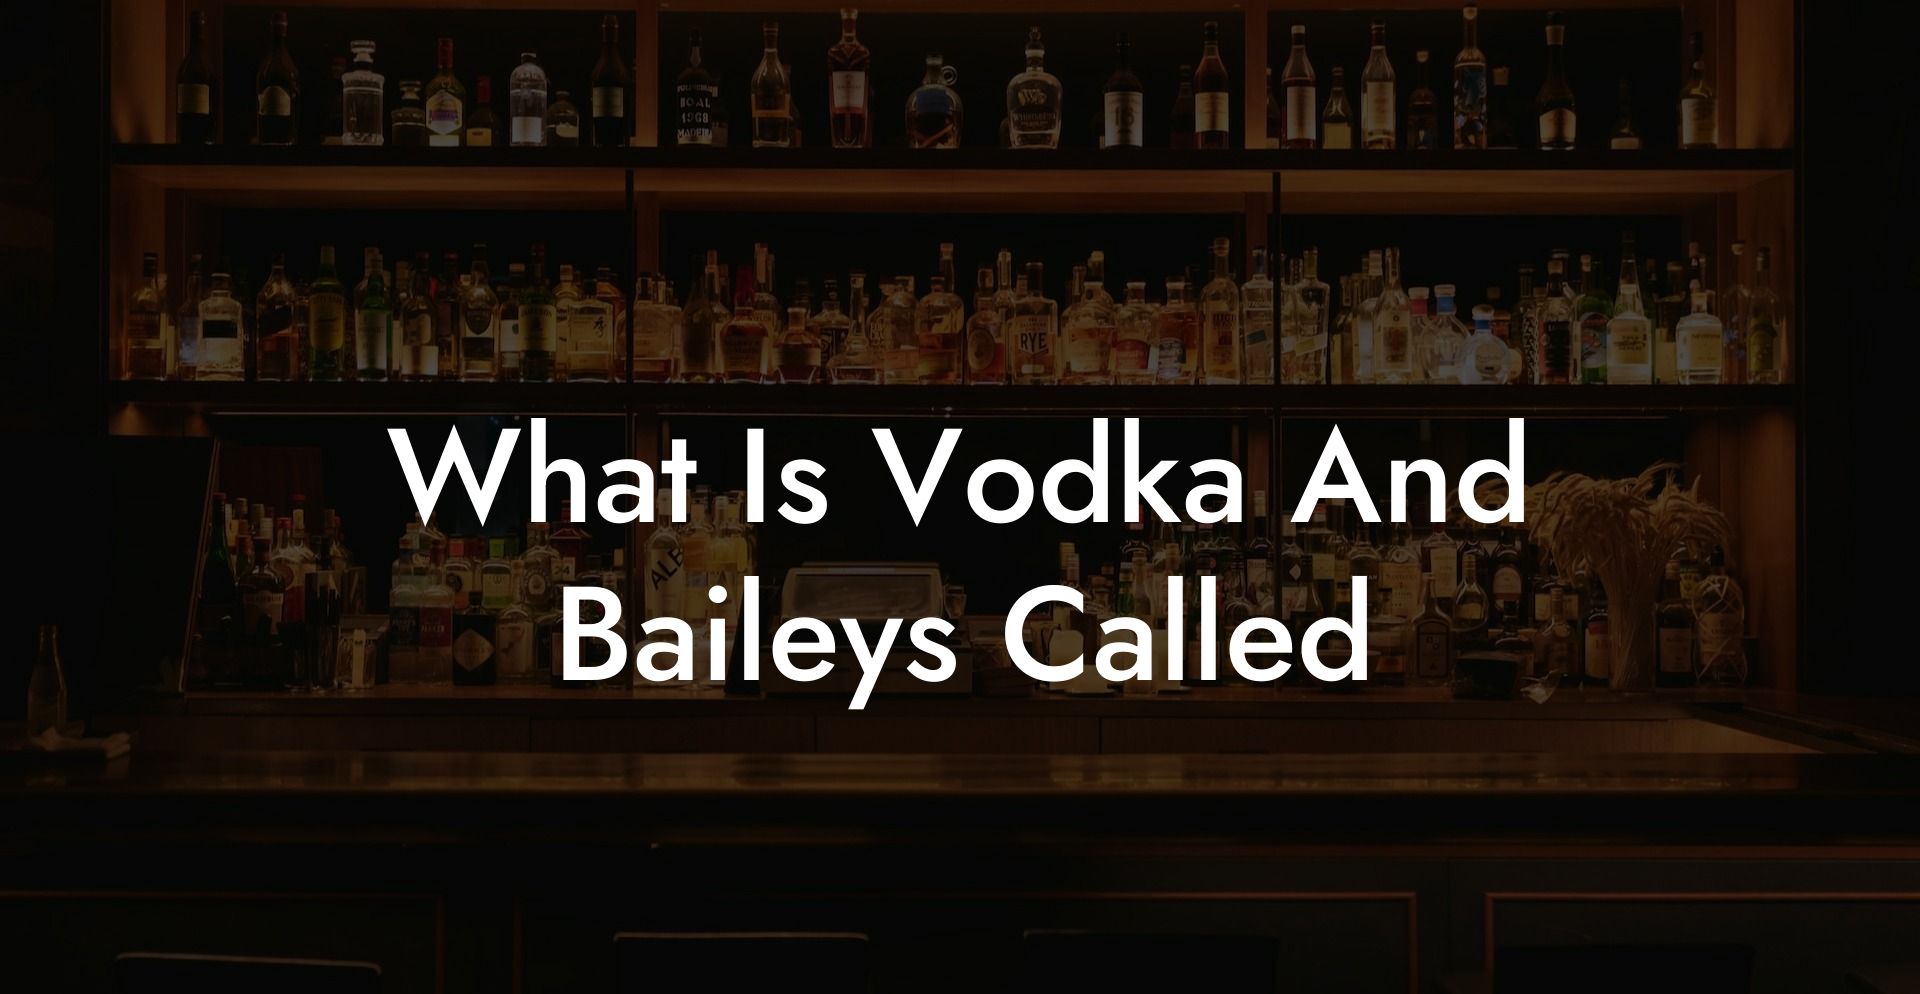 What Is Vodka And Baileys Called